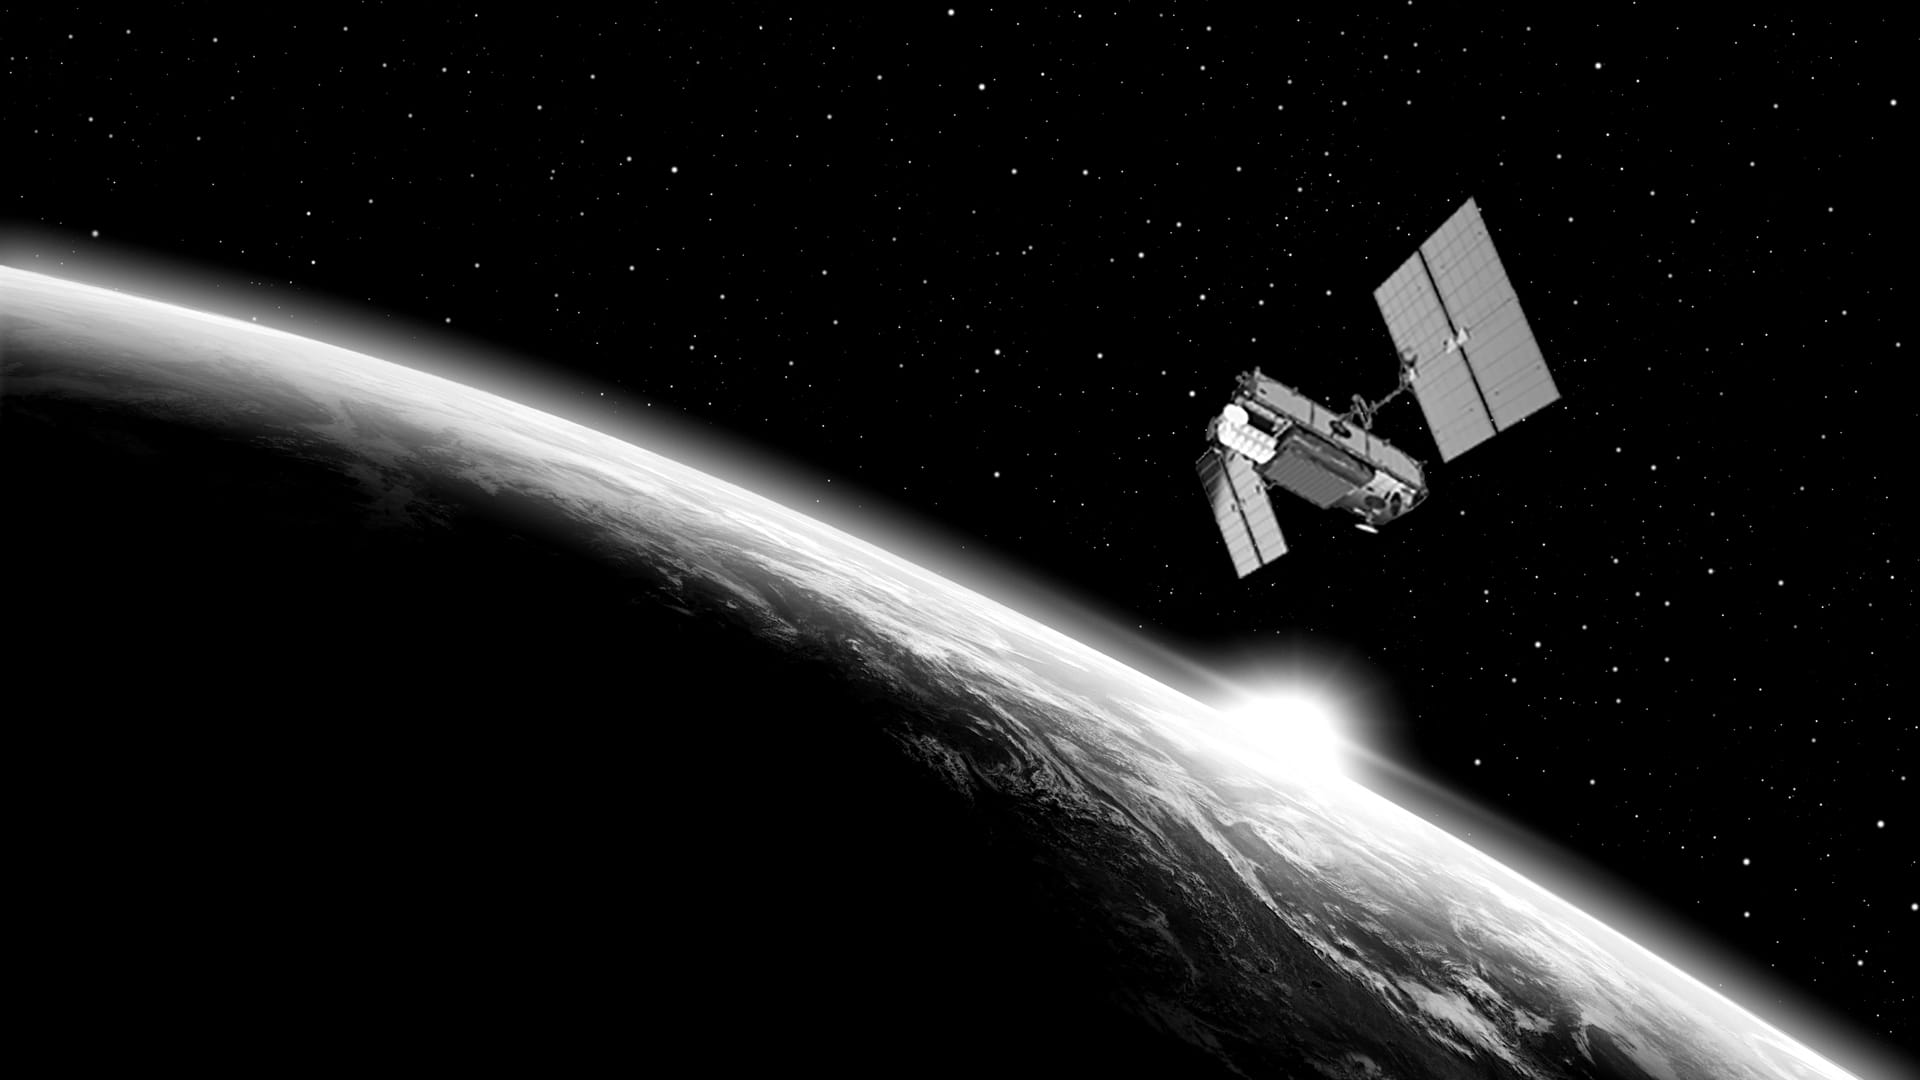 Illustration of a satellite above Earth